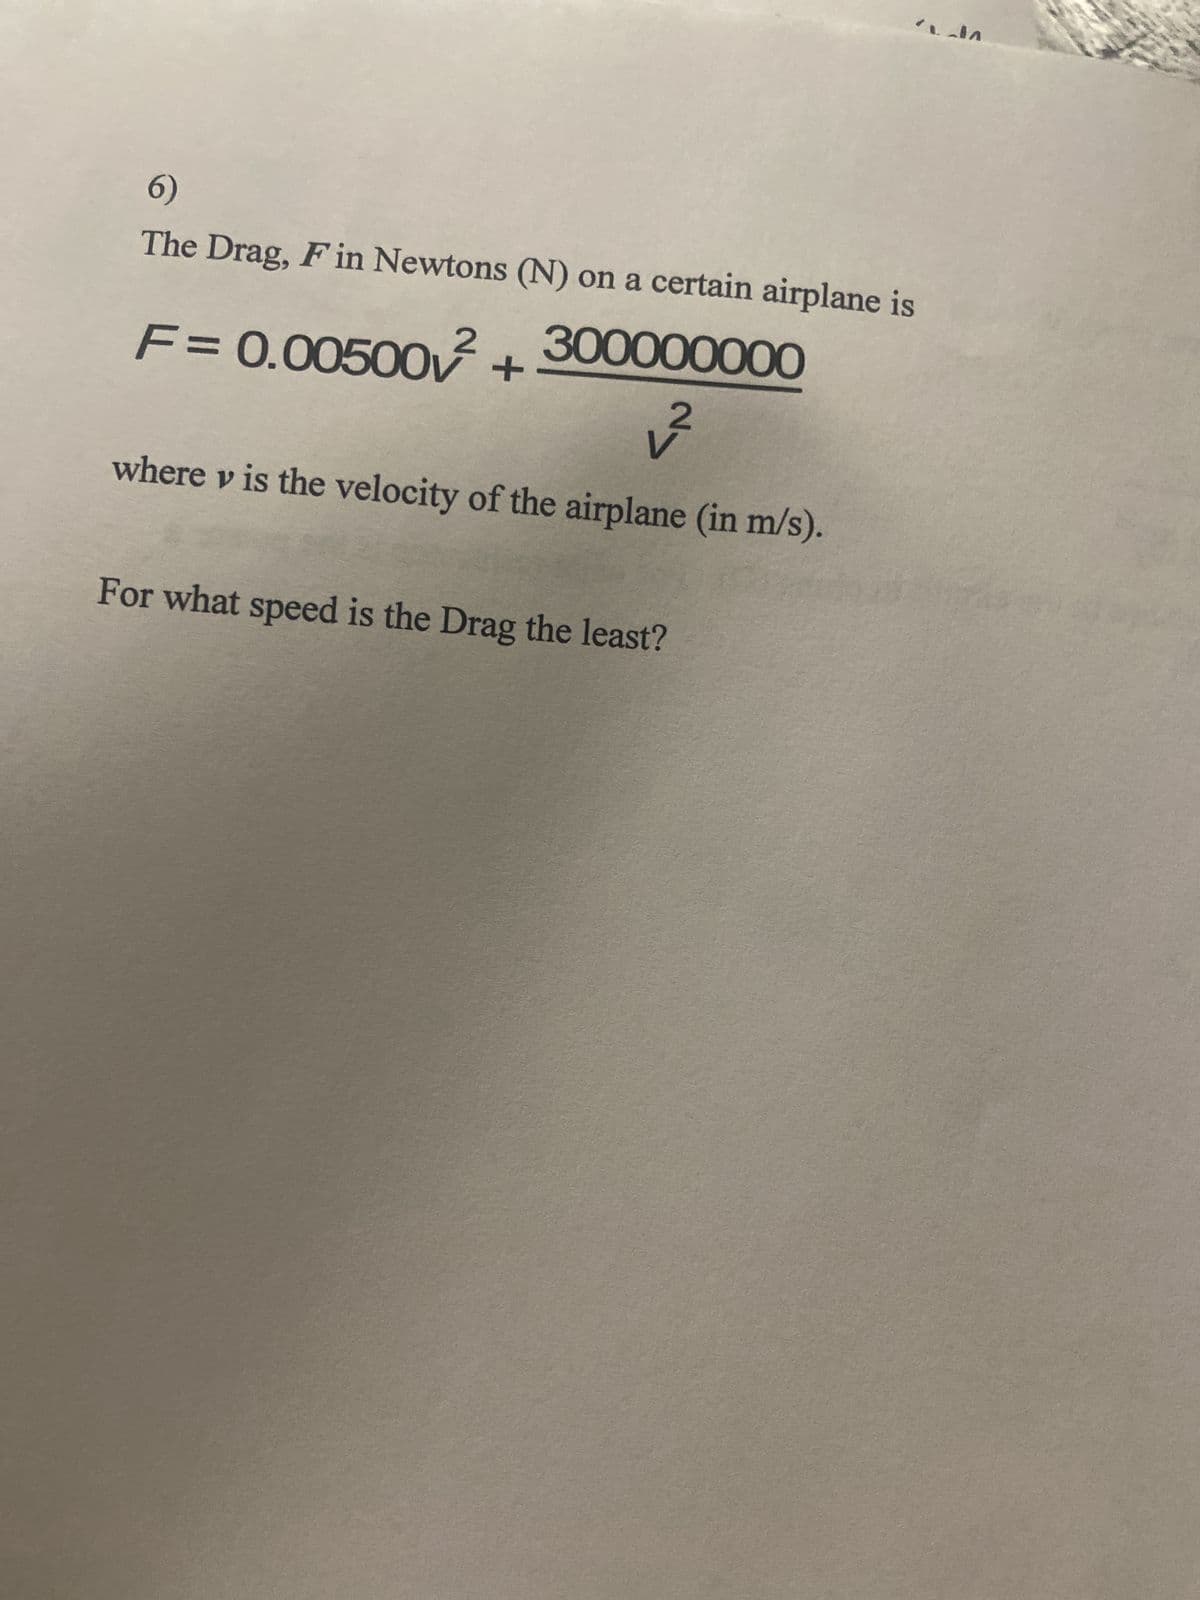 6)
The Drag, F in Newtons (N) on a certain airplane is
F= 0.00500² +
300000000
where v is the velocity of the airplane (in m/s).
For what speed is the Drag the least?